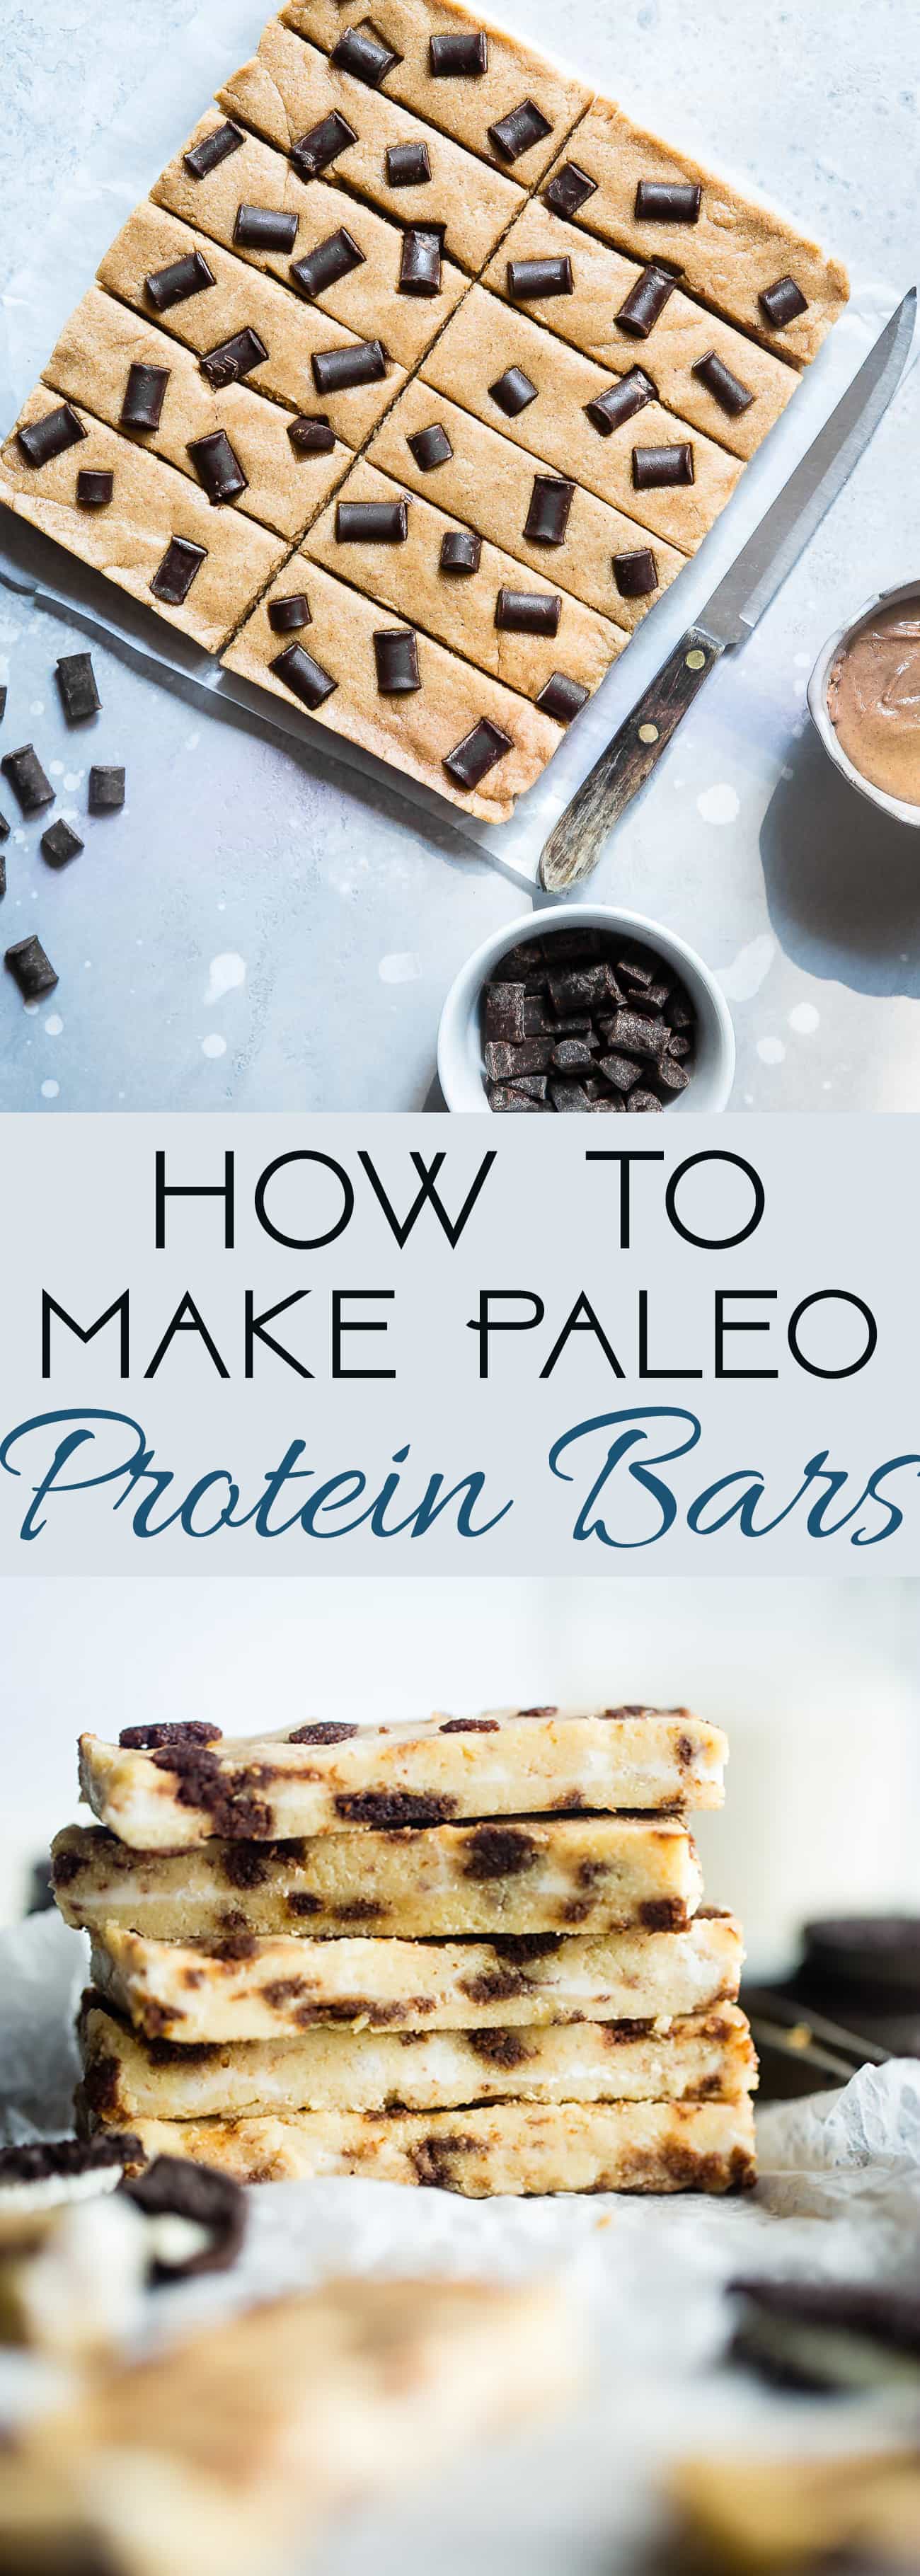 How to Make Paleo Protein Bars - Ever wondered how to make paleo protein bars? Learn how easy it is to make your favorite snack healthy, gluten free and grain free!  | Foodfaithfitness.com | @FoodFaithFit